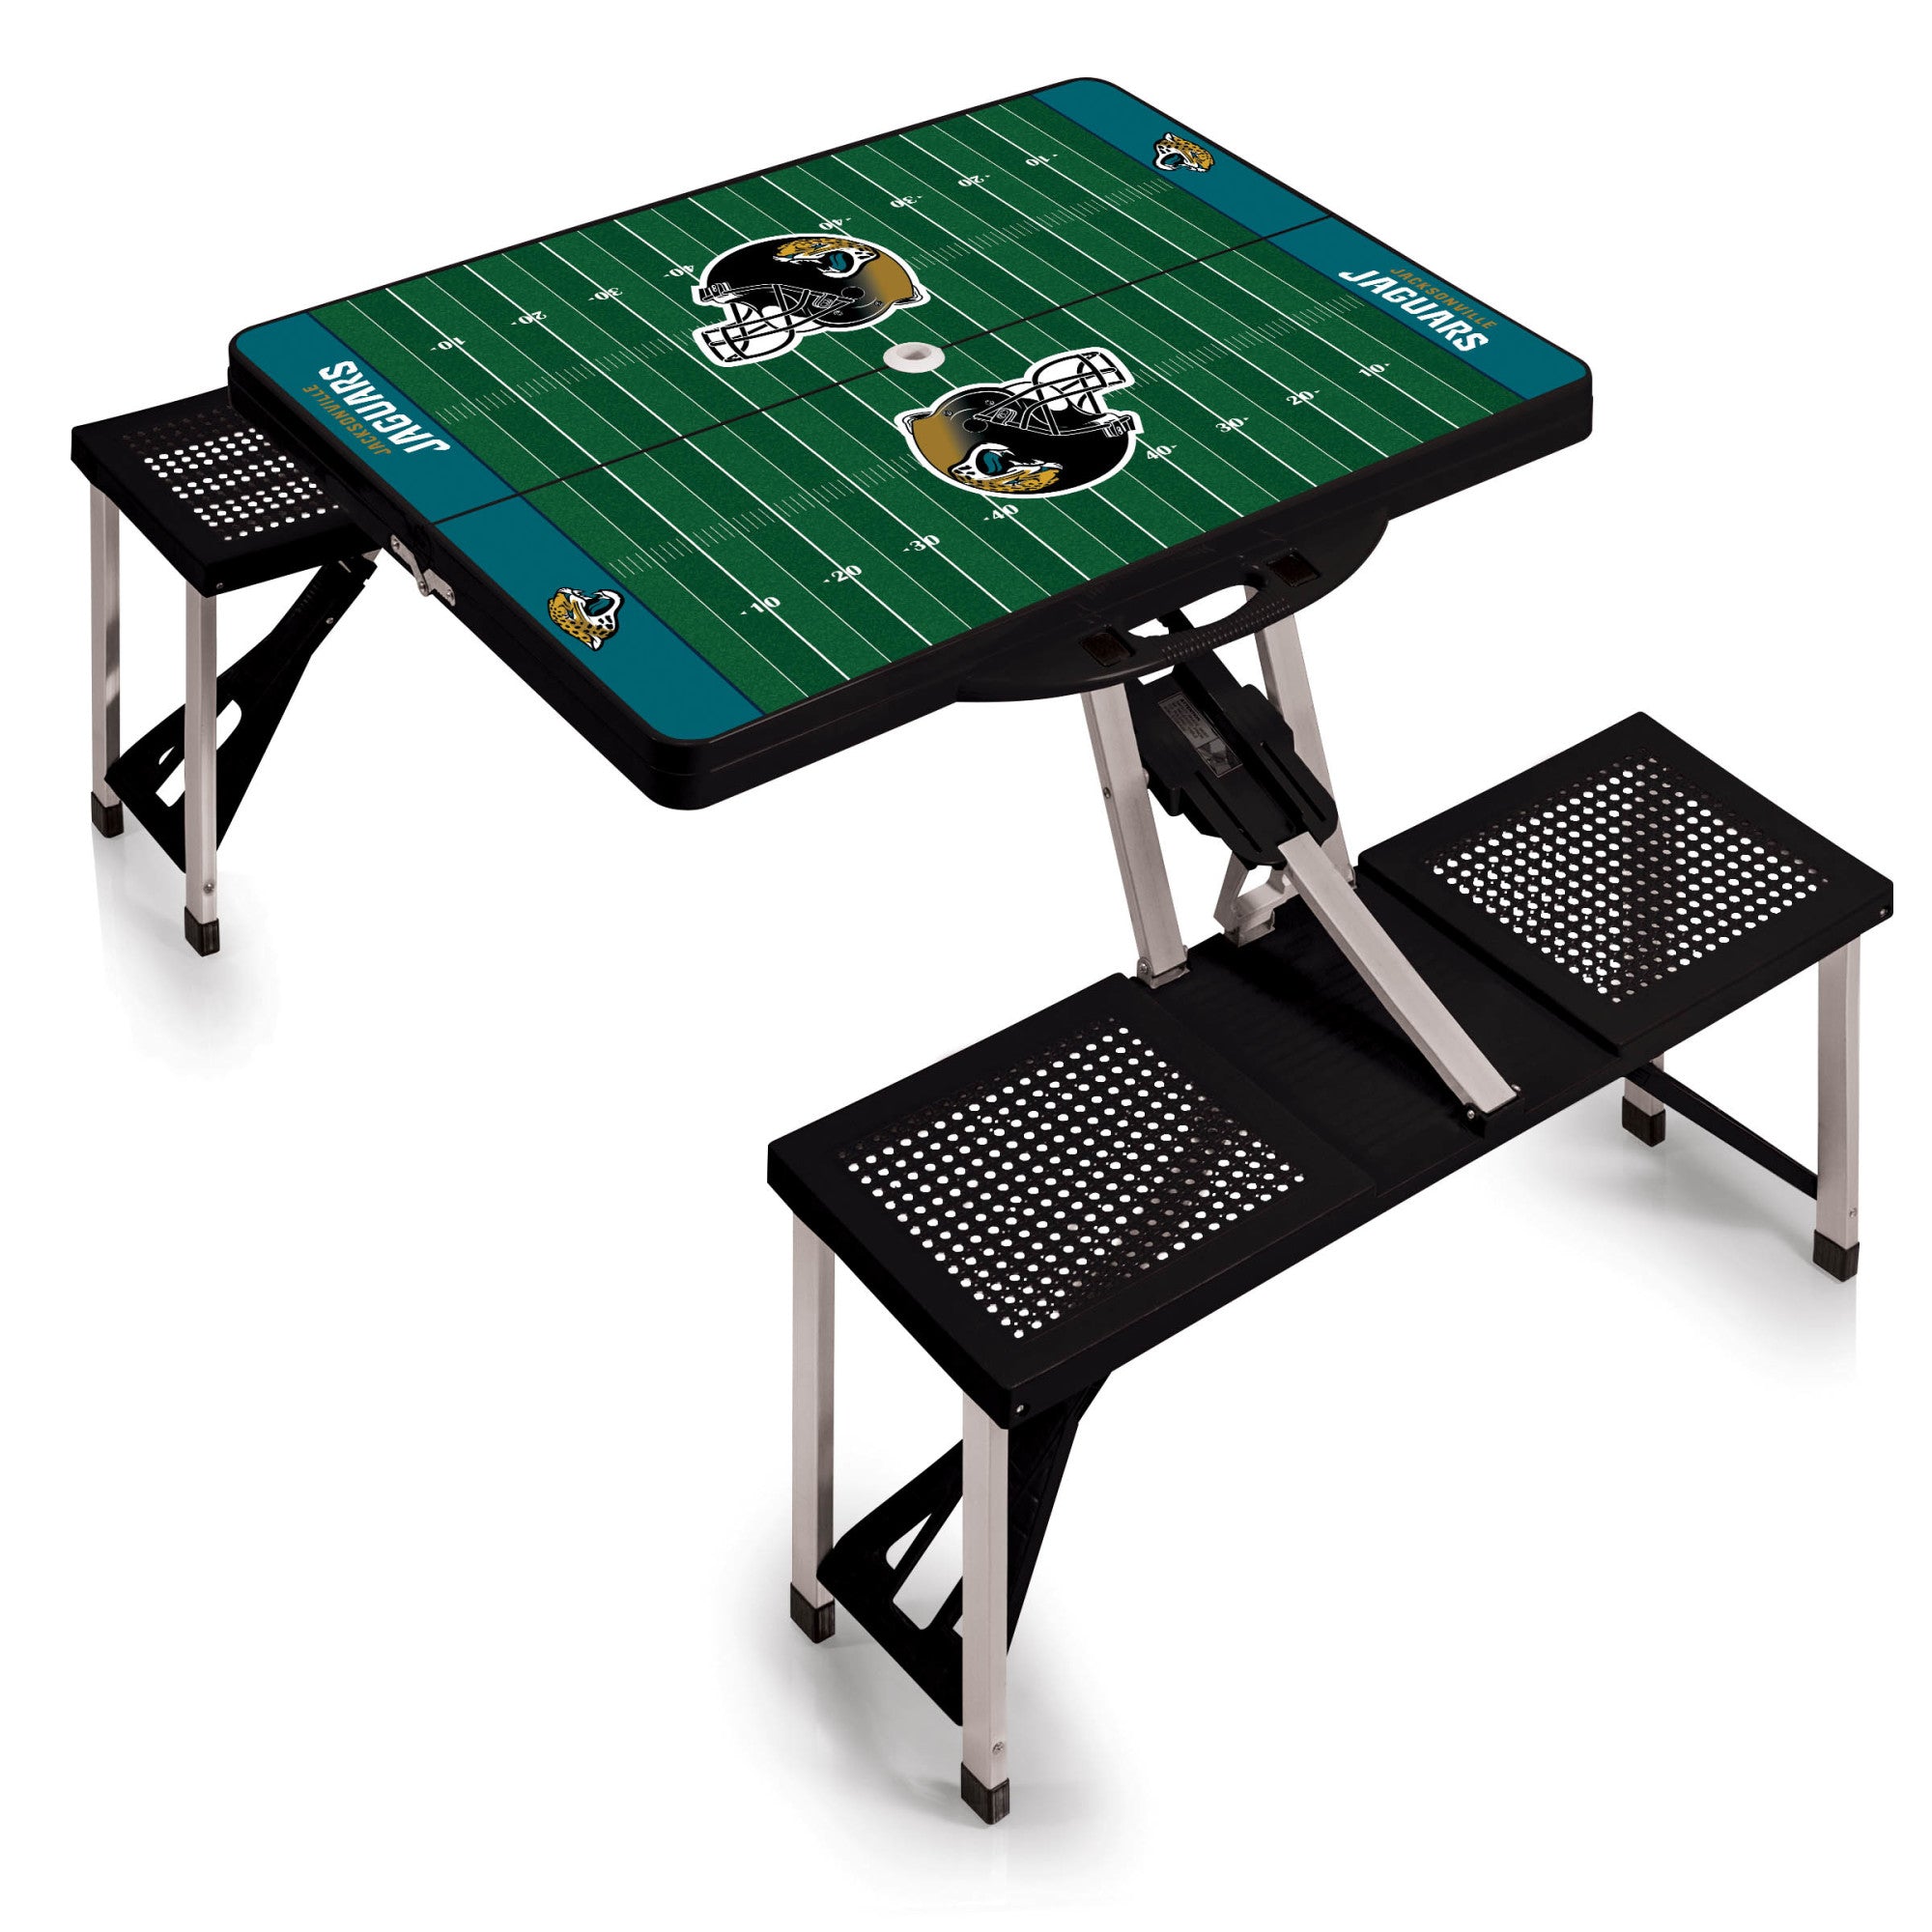 Jacksonville Jaguars - Picnic Table Portable Folding Table with Seats and Umbrella